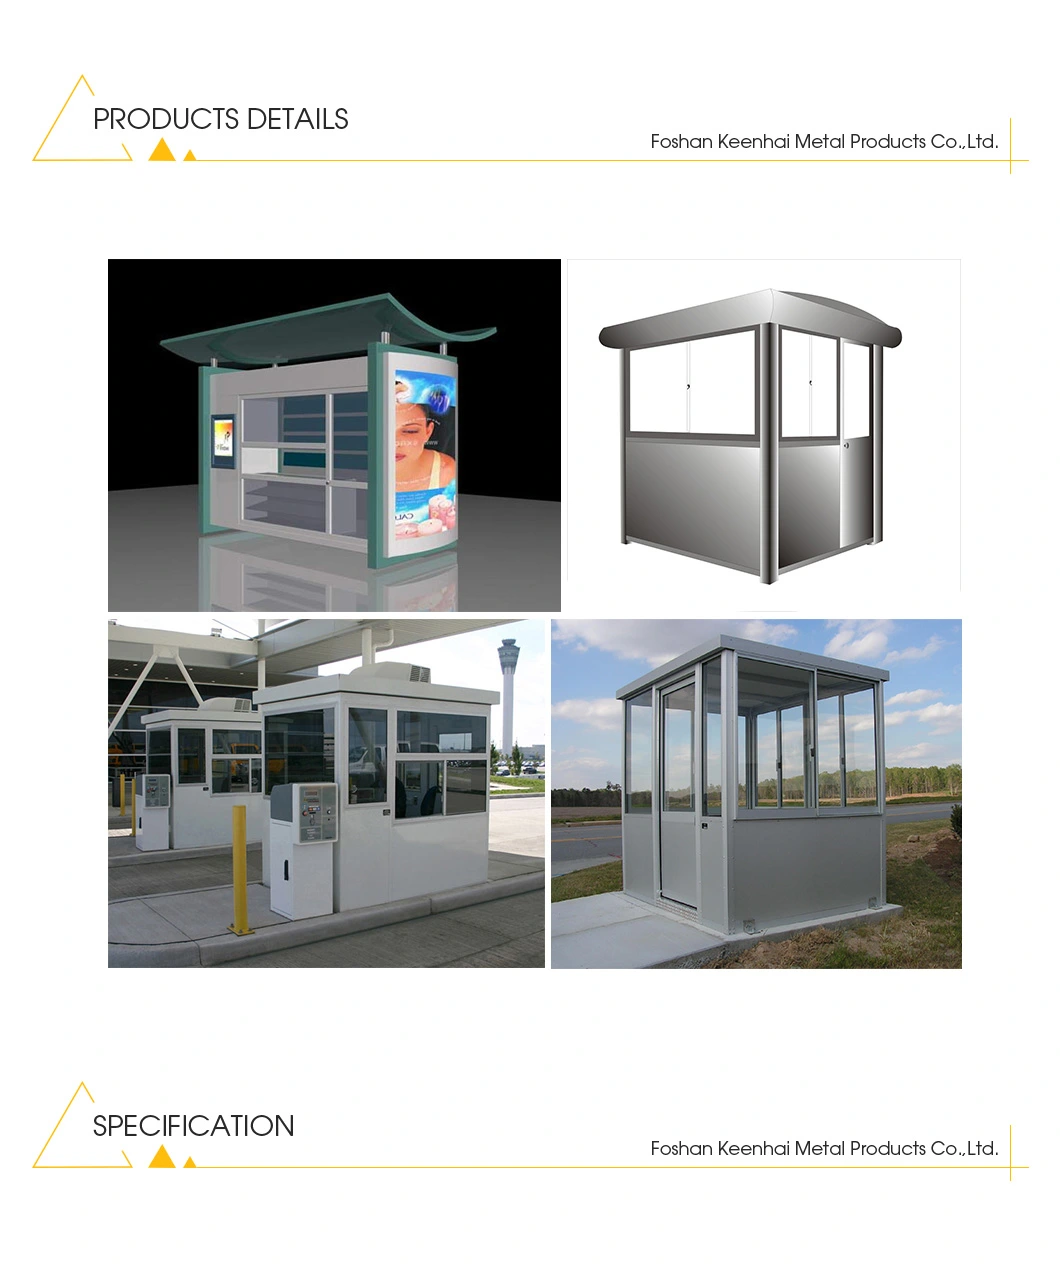 Stainless Steel Portable Toll Booth for Ticket